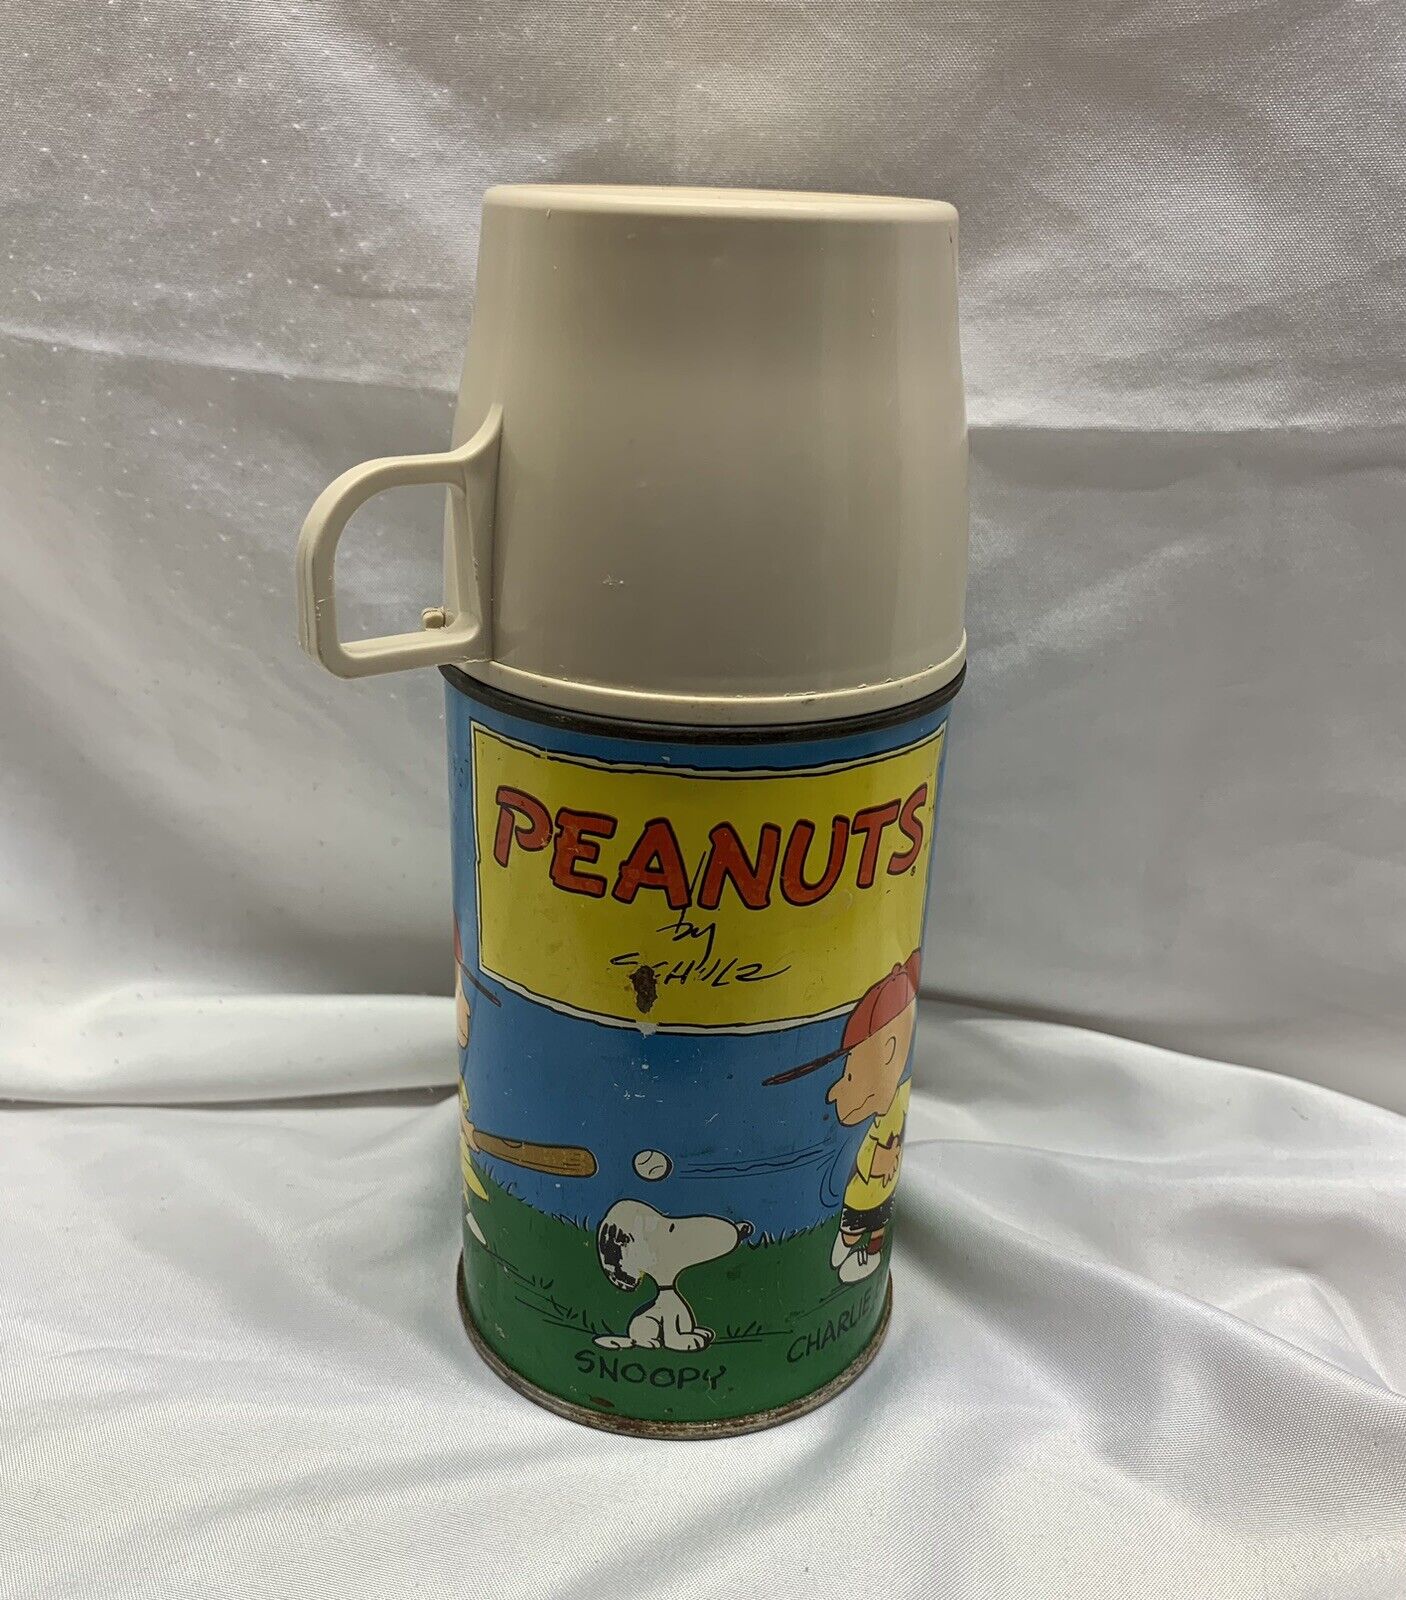 Vintage Schroeder Bottle Number 2868 Peanuts Snoopy Thermos Half Pint Size